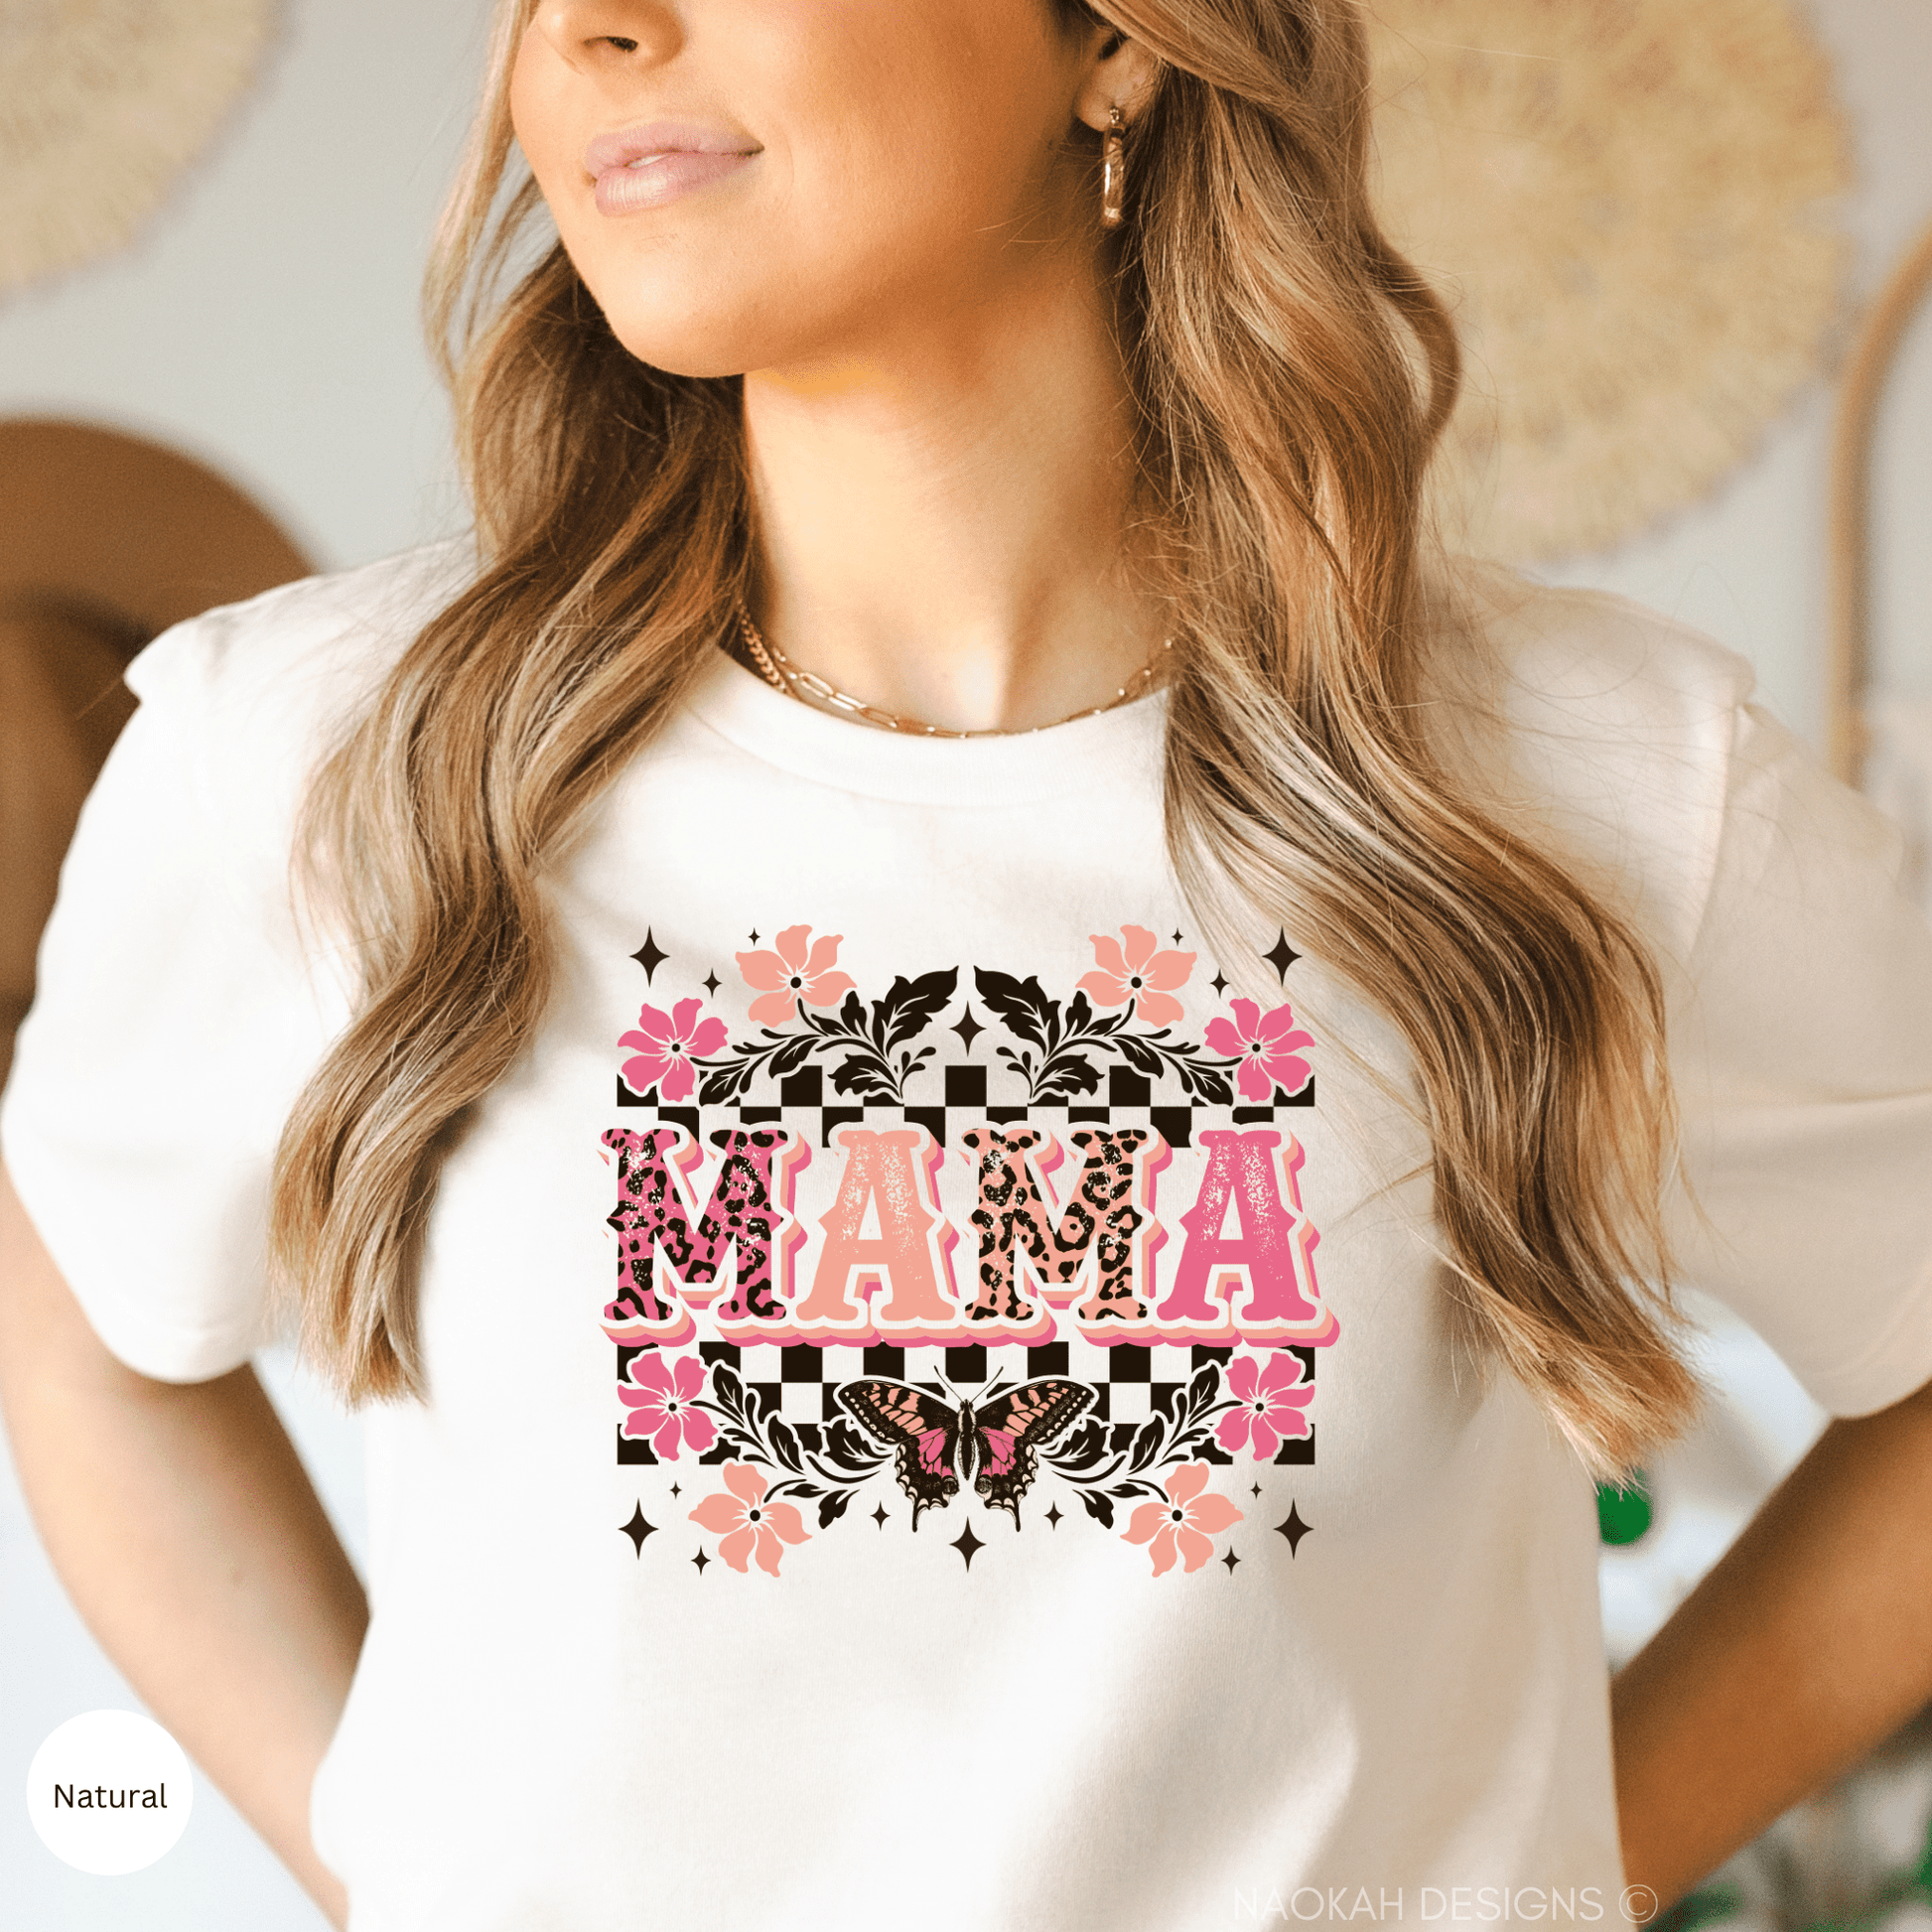 Mama Floral Butterfly Shirt, Mothers Day Gift, Mom T-shirt, Floral Shirt, Butterfly Shirt, Flower Shirt, Women Tees, Mothers Day shirt